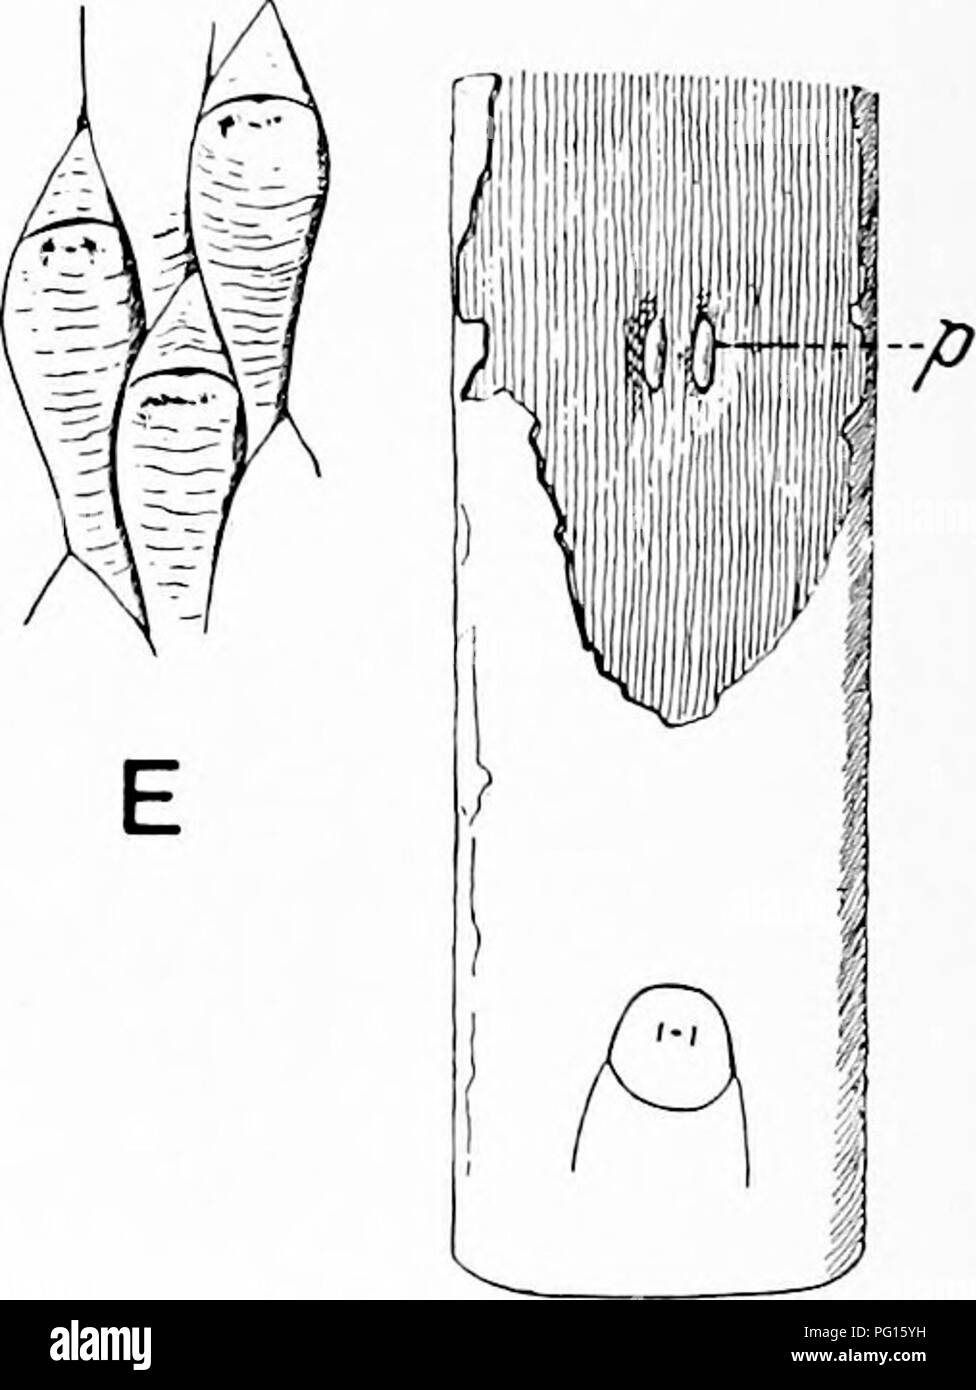 . Fossil plants : for students of botany and geology . Paleobotany. B viCi ^,&gt;K m. Fig. 196. A—C. Sigillaria Brardi. (A after Germar ; B, C after Zeiller.) D. Sigillaria laevigata. E. Lepidodendron Wortheni (D and E after Zeiller). Grand'Eury^ may be applied to detached leaves, though it is by no means easy to distinguish between the foliage of Sigillaria and Lepidodendron. A comparison of a typical species of Sigillaria, such as S. rugosa (fig. 193, B) or S. Brardi (fig. 196, A—C) with a typical Lepidodendron reveals obvious 1 Grand'Eury (90) A.. Please note that these images are extracted Stock Photo